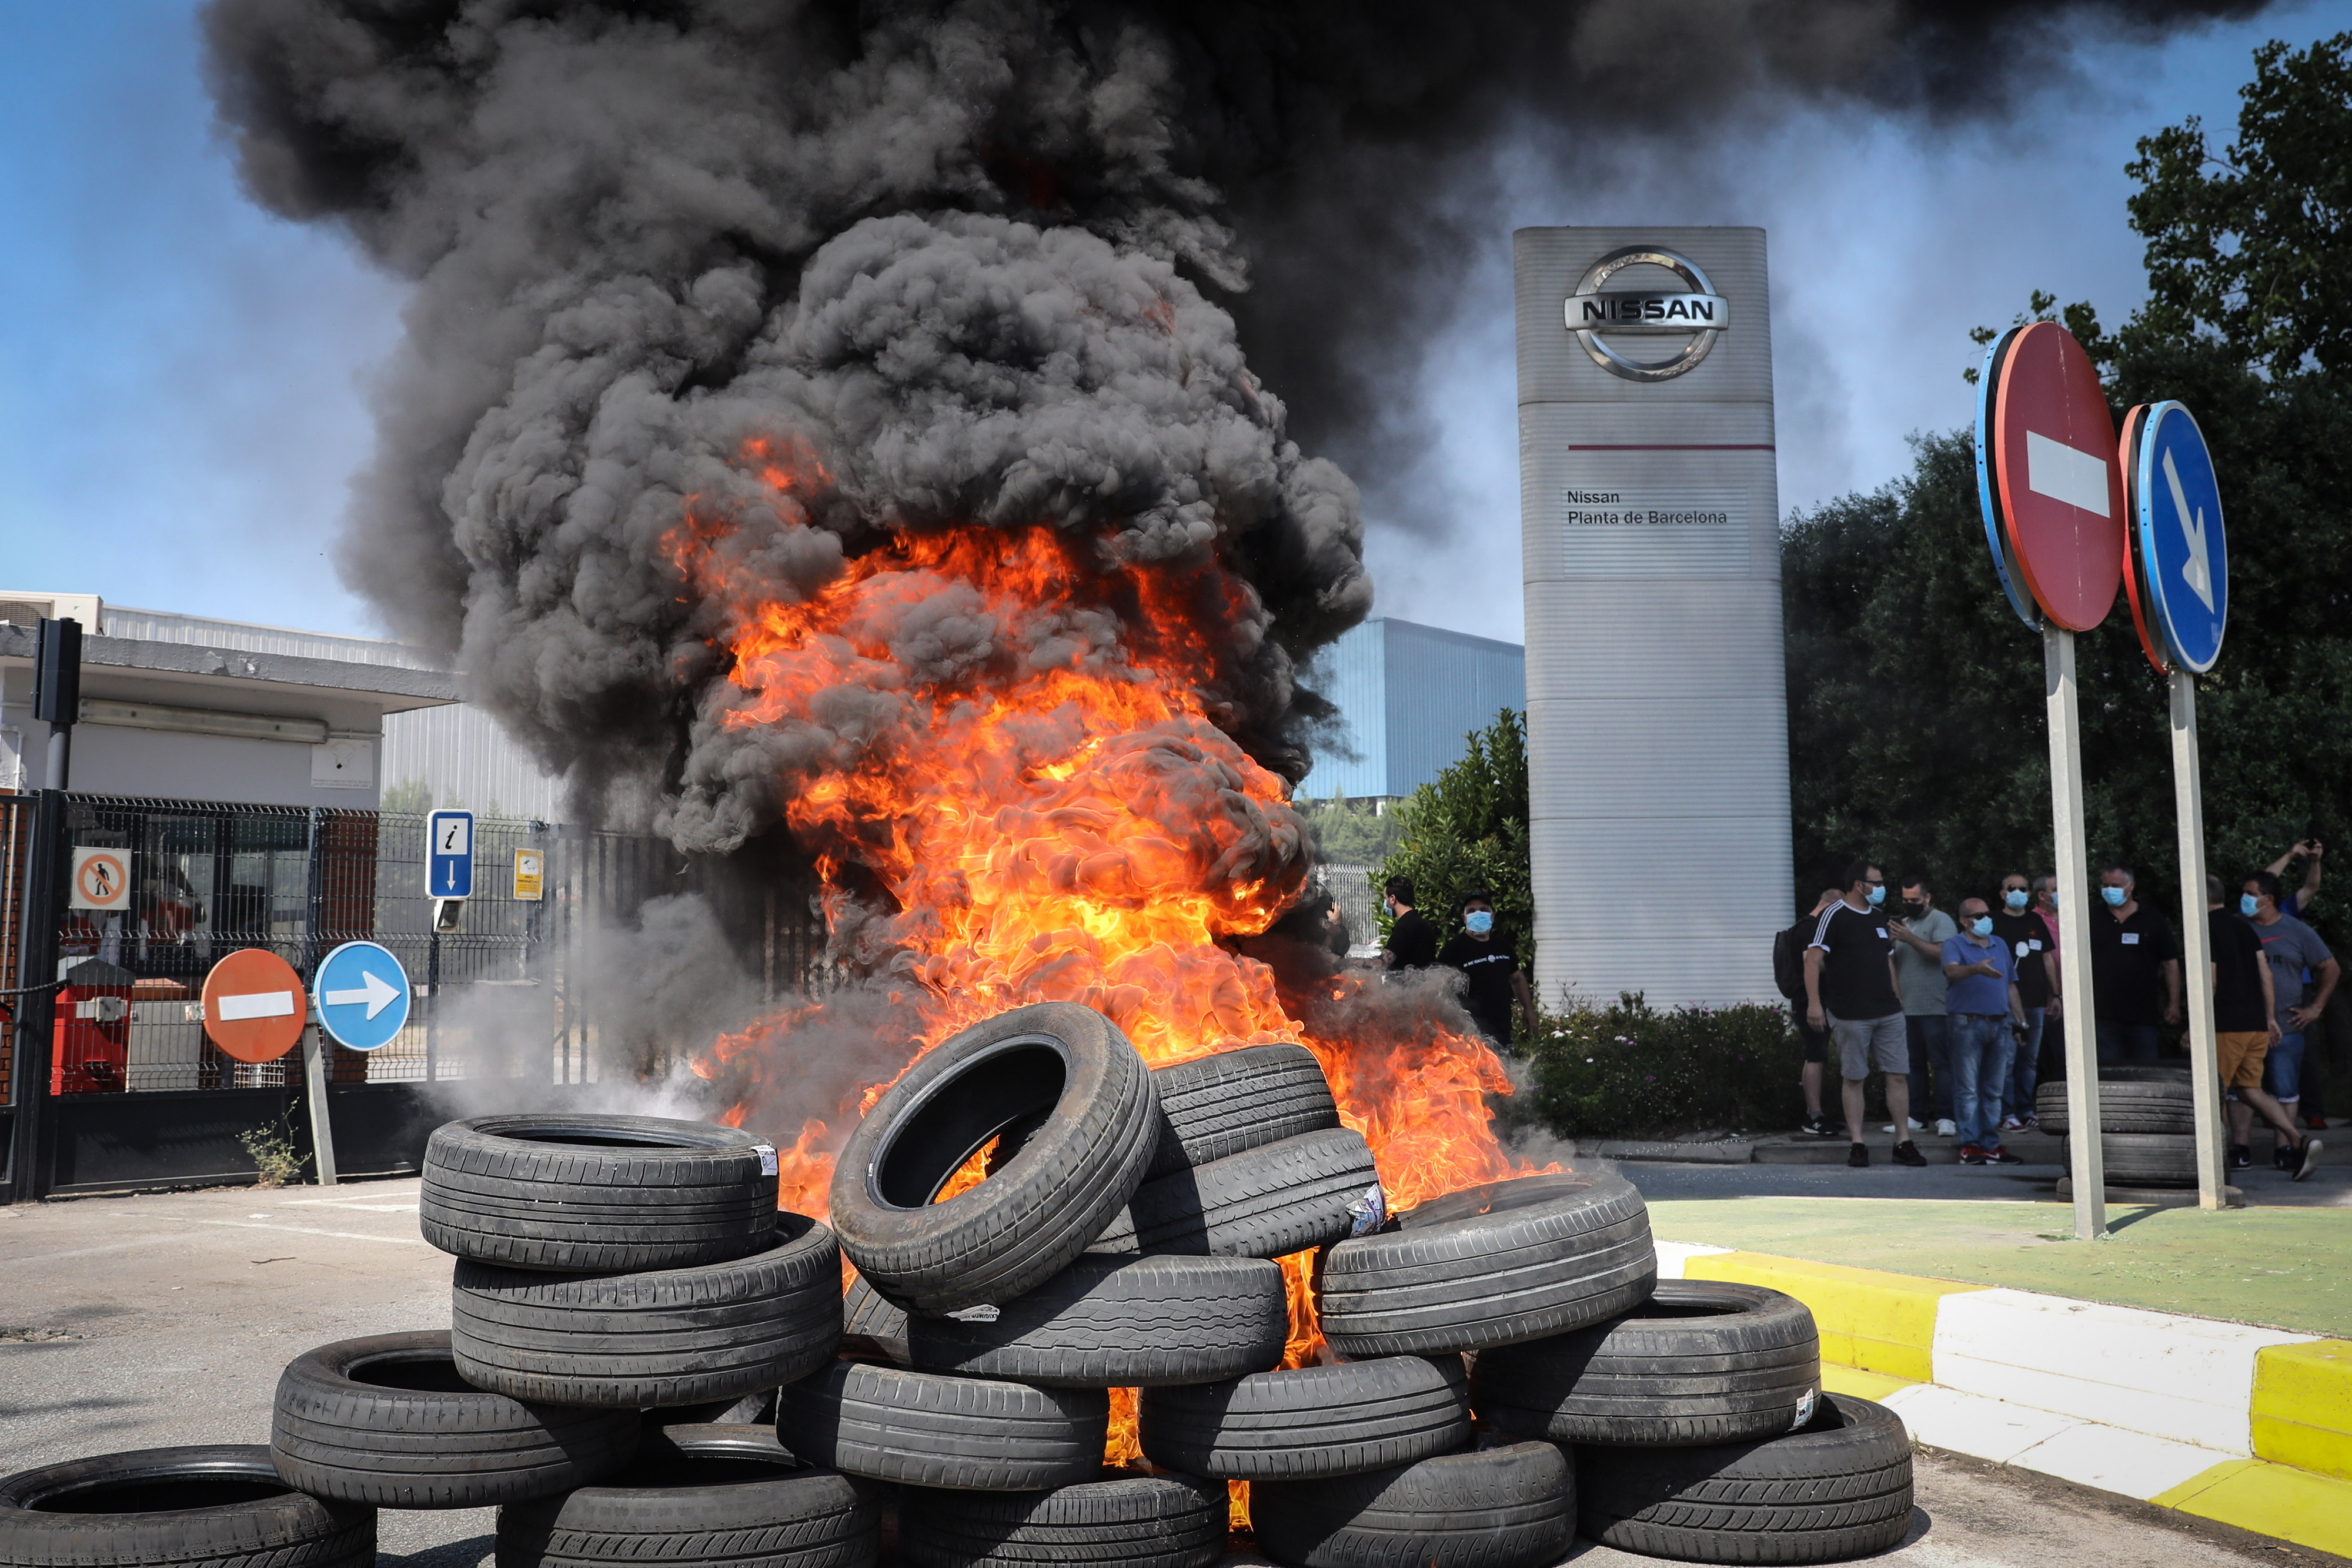 Demonstrators set fire to tires outside the Nissan Motor Co. plant in Barcelona.